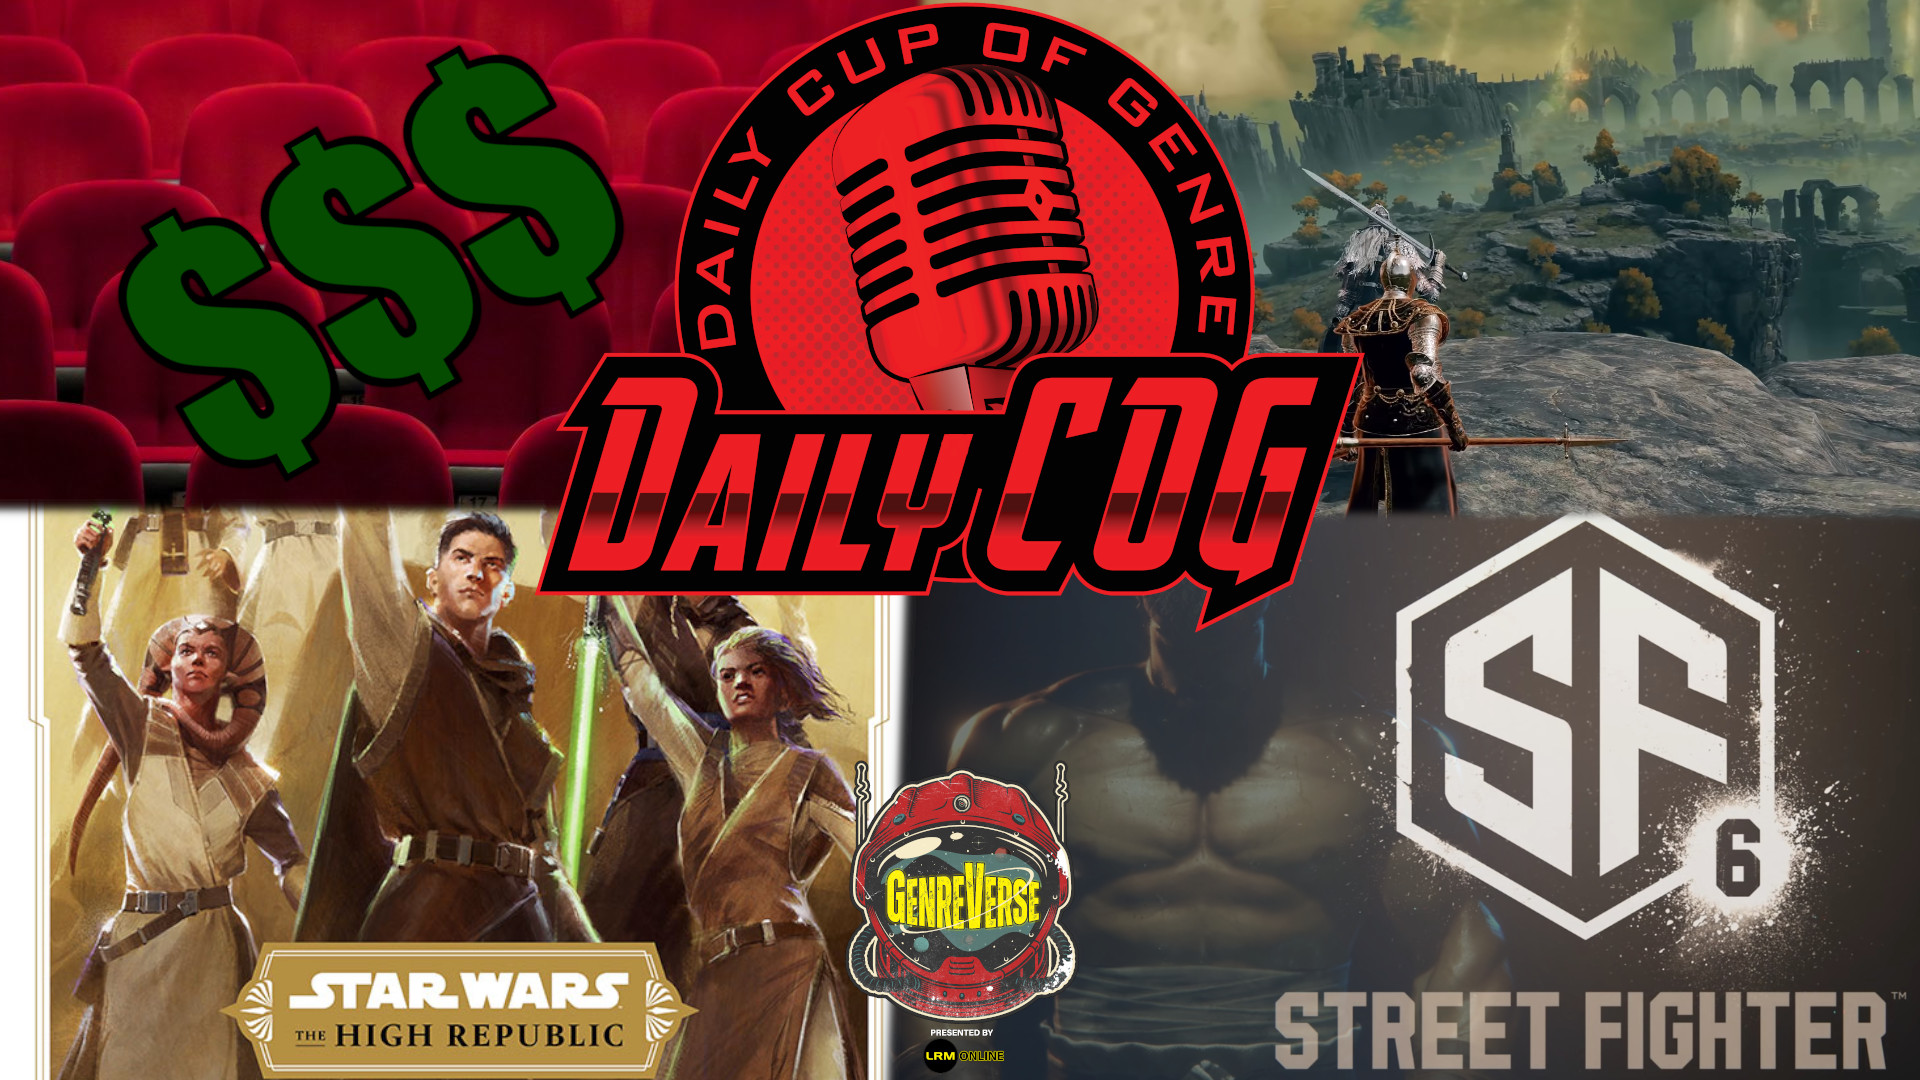 Weekend Box Office, Jon Watts Eyed For Star Wars: The High Republic Series, Street Fighter 6 & Elden Ring Overview Reaction | Daily COG